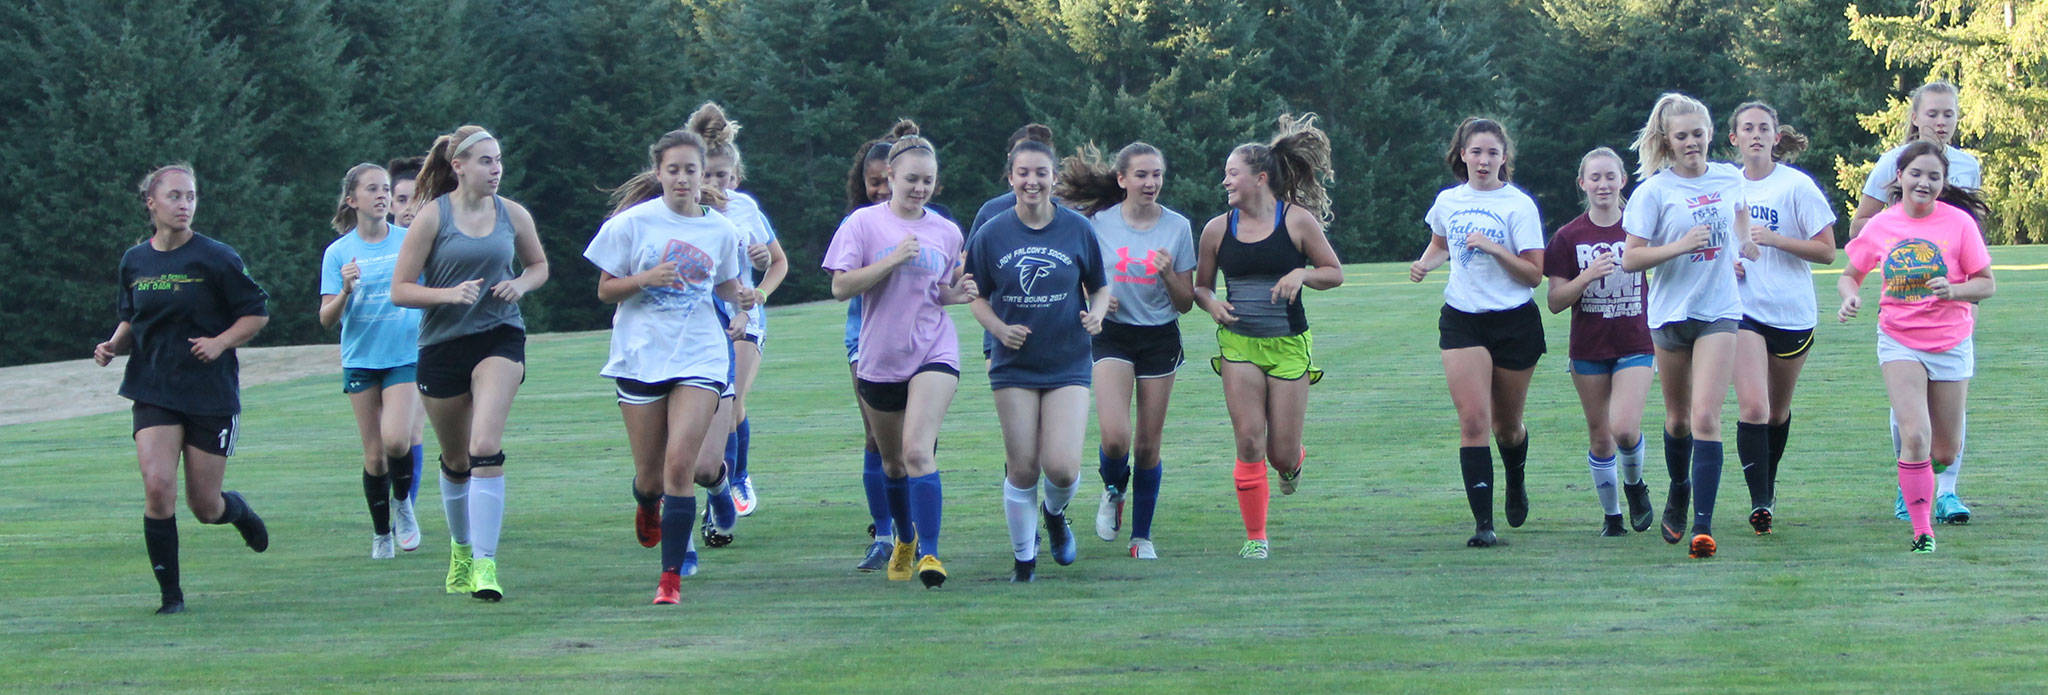 The South Whidbey High School soccer team opens practice with several warmup laps Monday. (Photo by Jim Waller/South Whidbey Record)